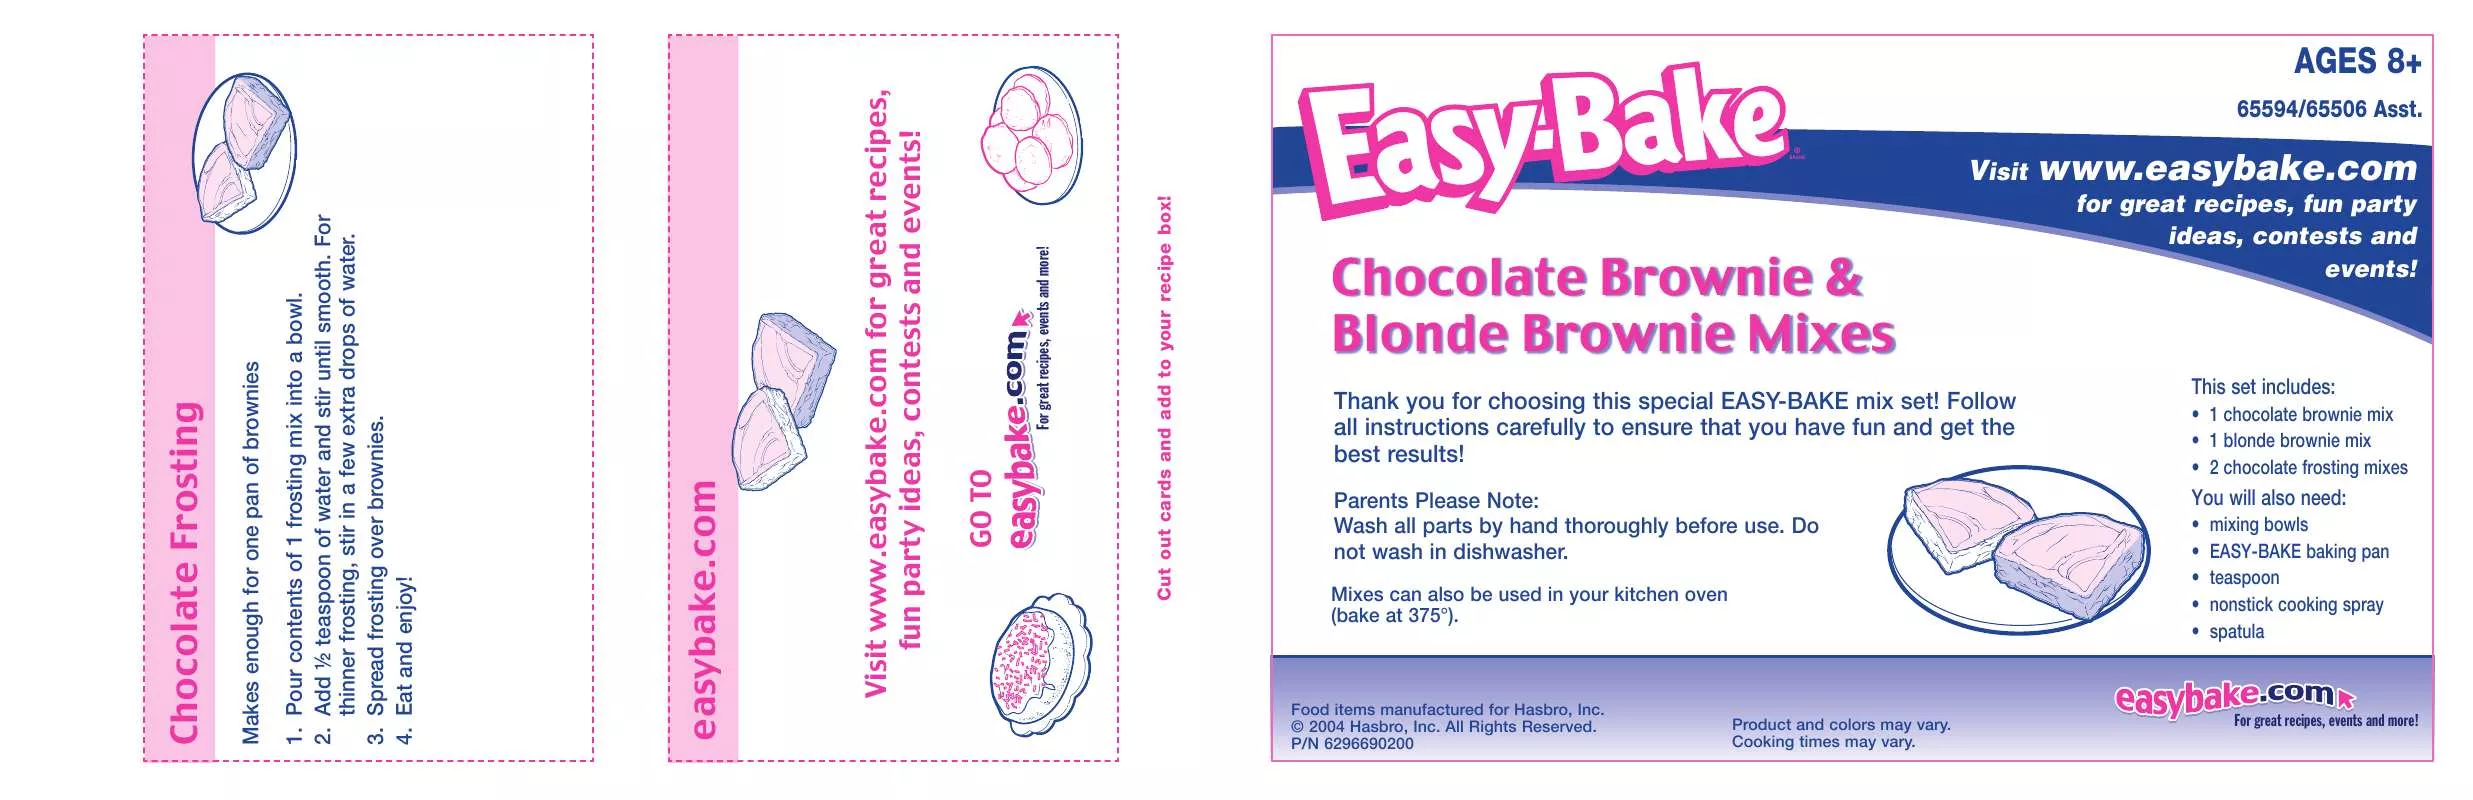 Mode d'emploi HASBRO EASY BAKE CHOCOLATE BROWNIE AND BLONDE BROWNIE MIXES 65594